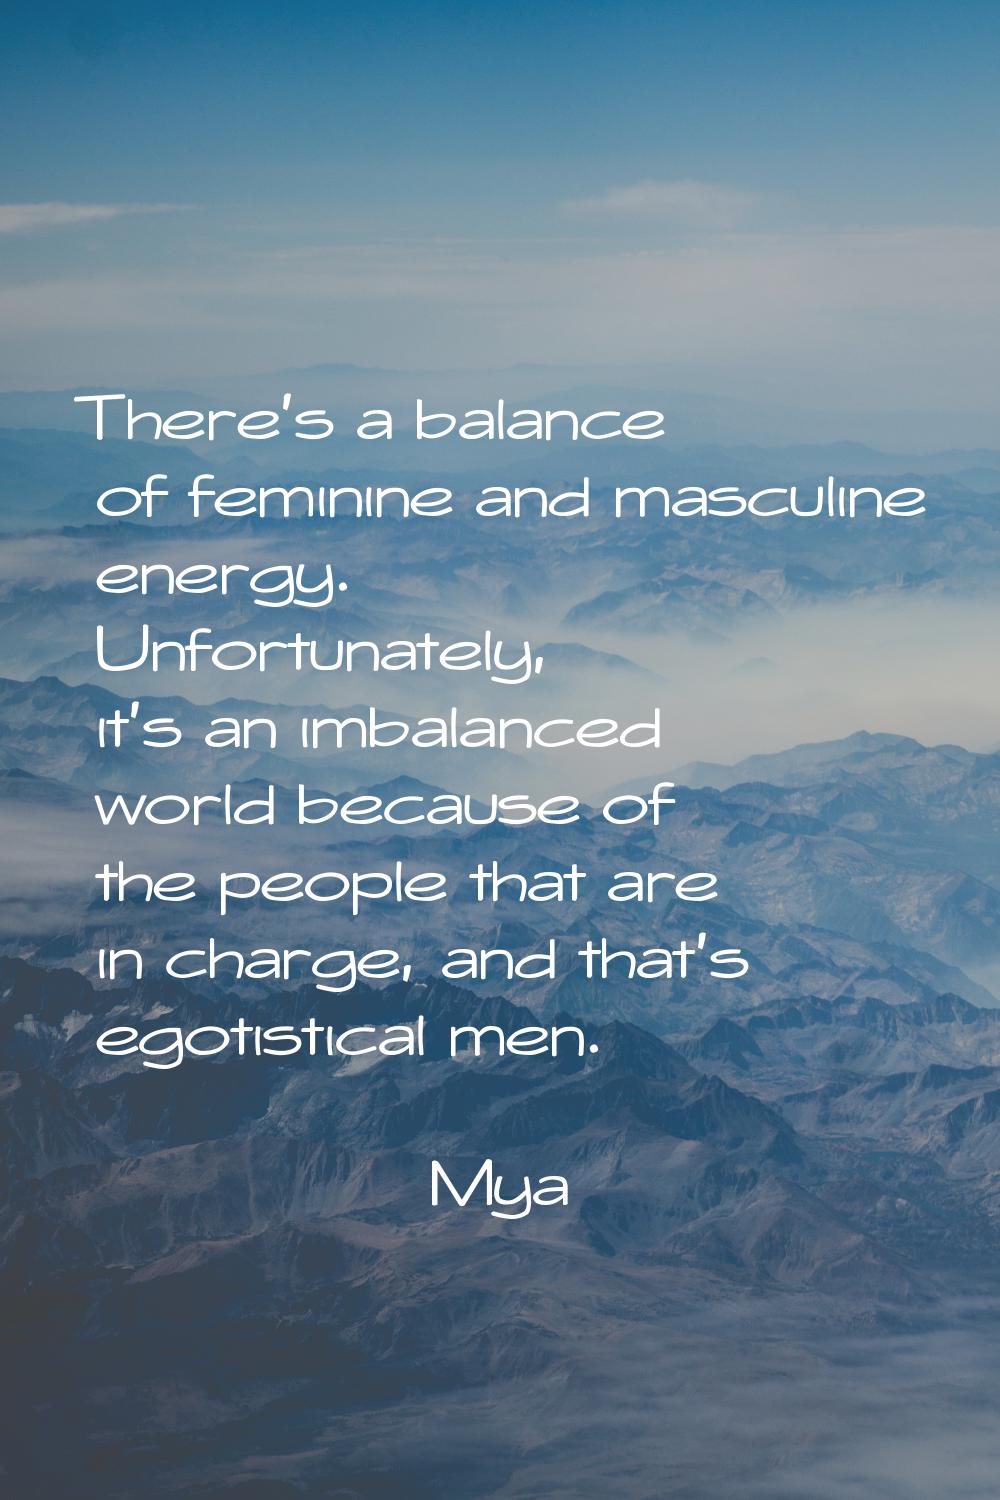 There's a balance of feminine and masculine energy. Unfortunately, it's an imbalanced world because